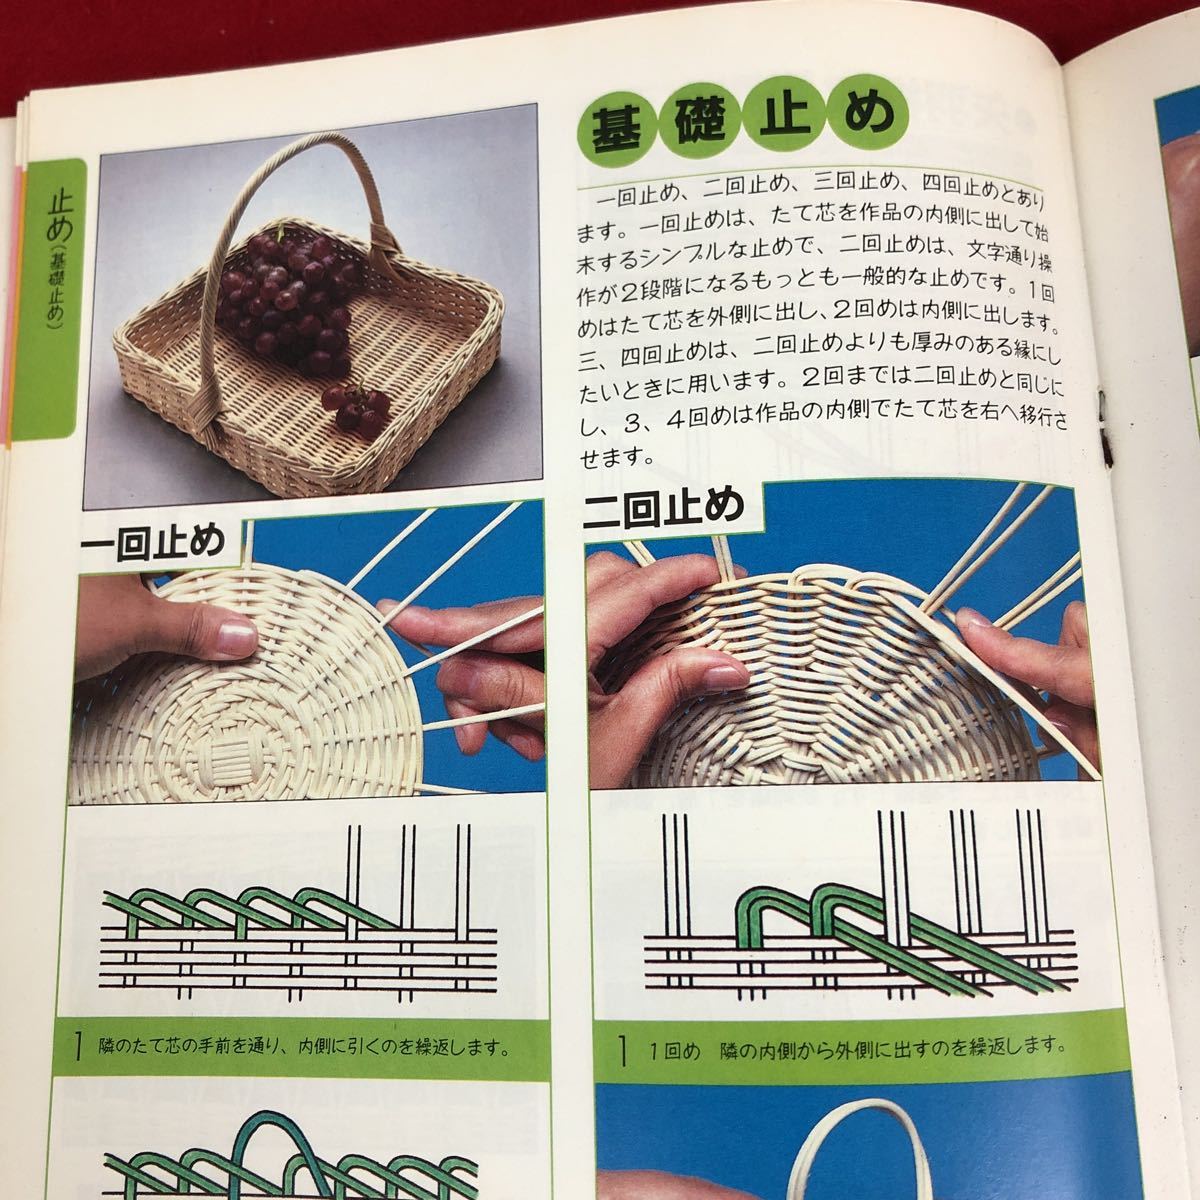 h-058 *9 rattan handicrafts Vogue base series bottom collection . cease . hand accessory finishing person Showa era 58 year 5 month 20 day issue Japan Vogue company handicrafts rattan industrial arts hobby introduction 